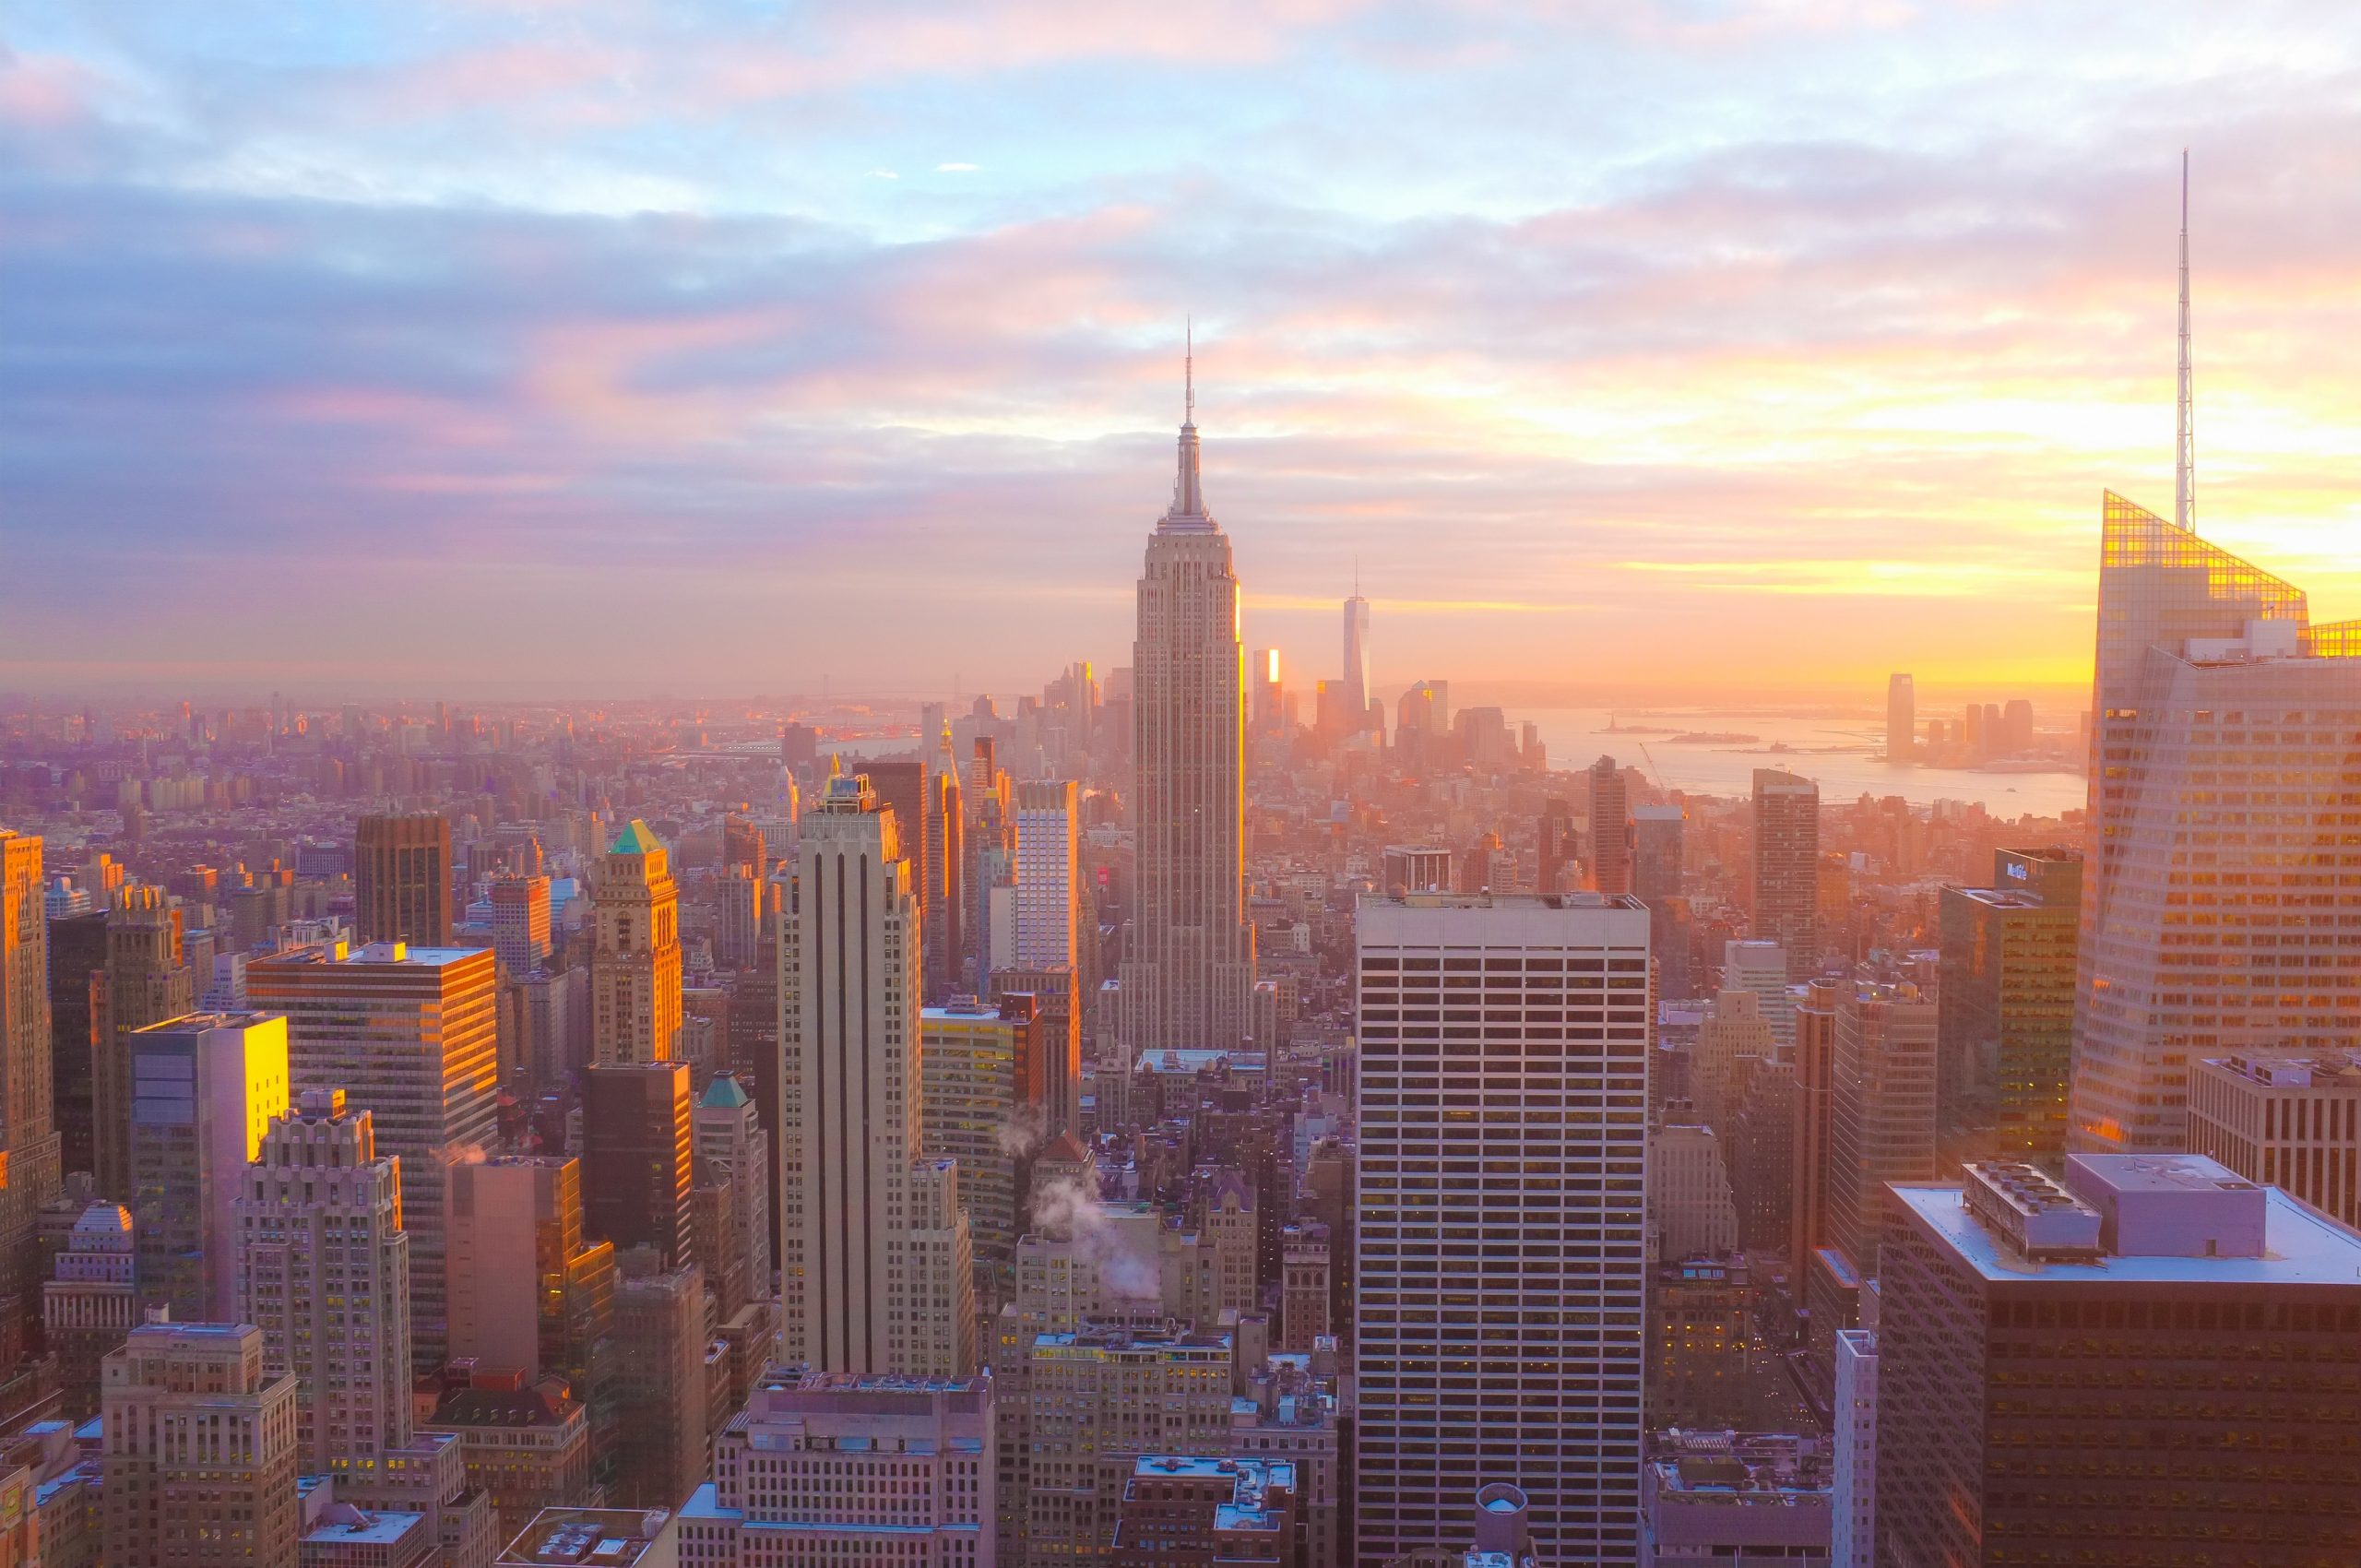 New York City expects to attract 12.1 million business travelers in 2023. Photo: Unsplash